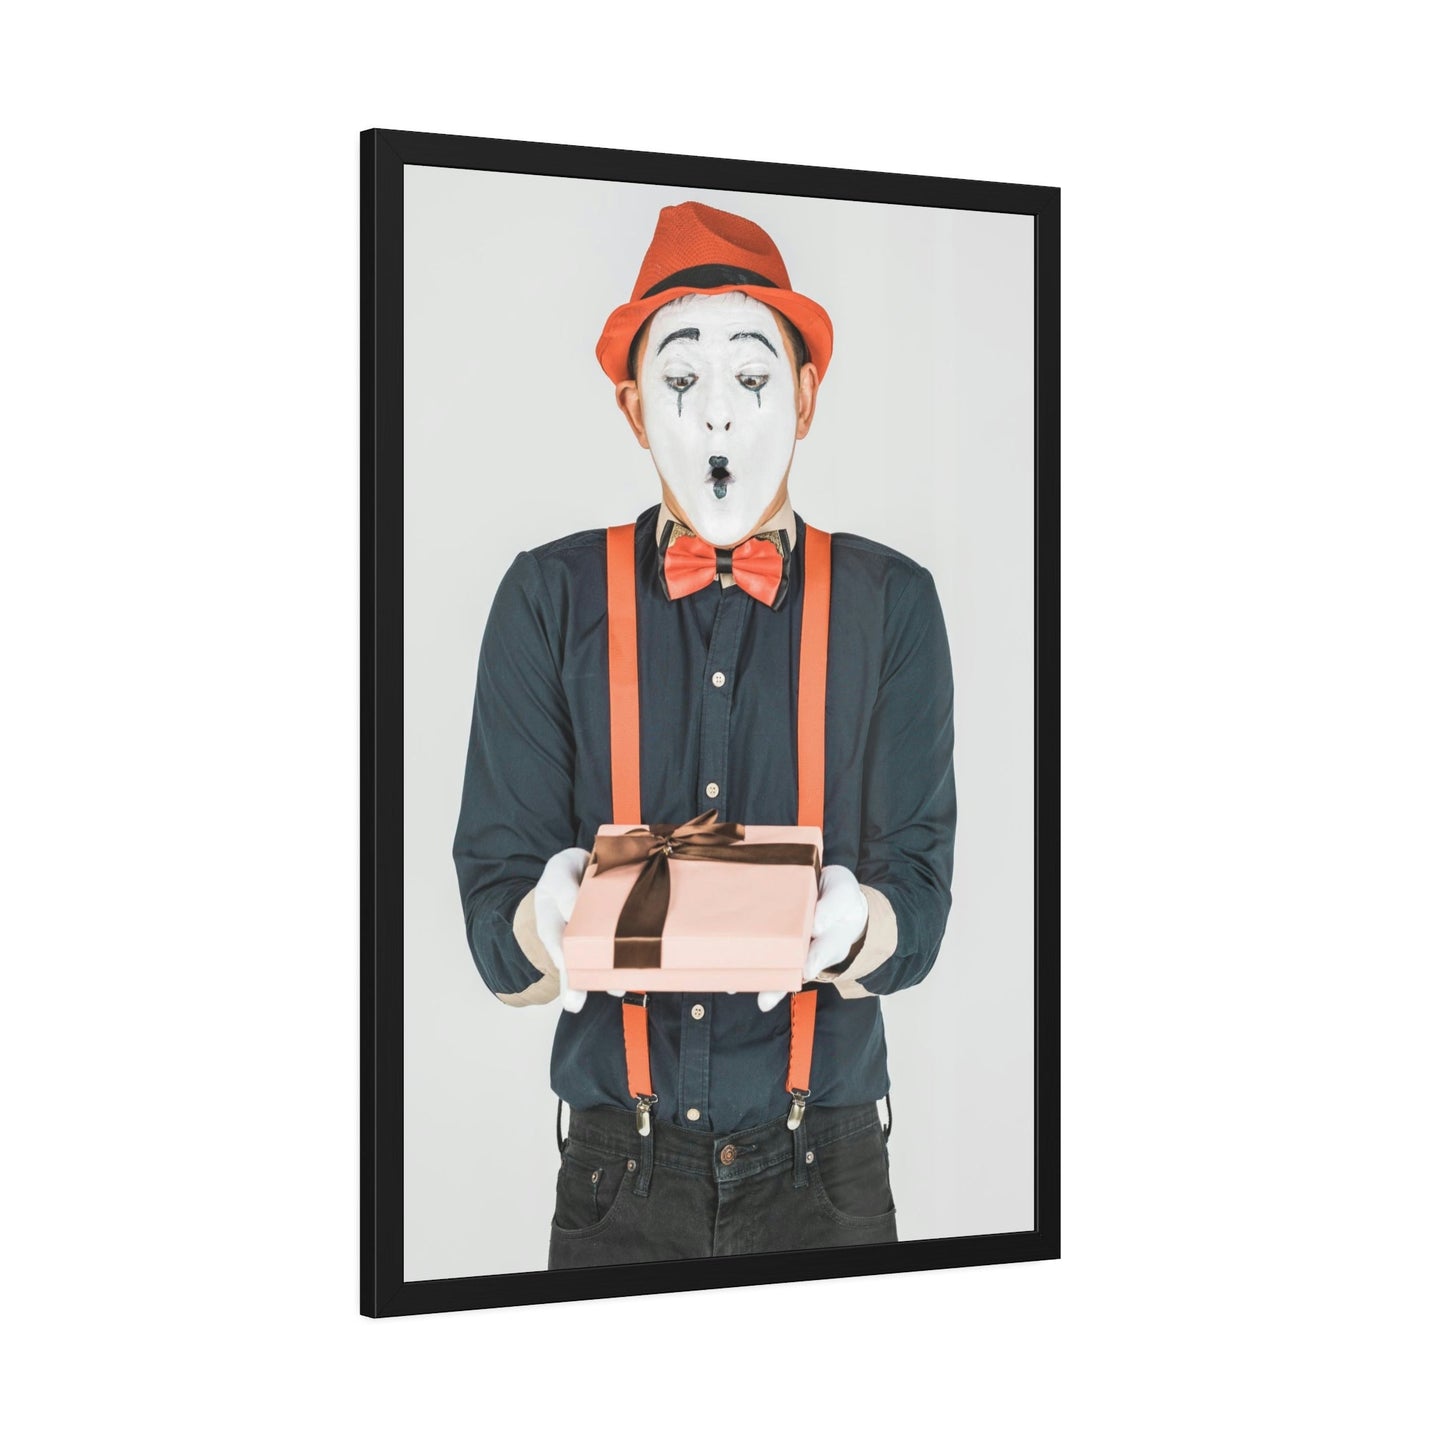 The Jester's Gallery: A Wall Art Collection of Whimsical Comedy Scenes